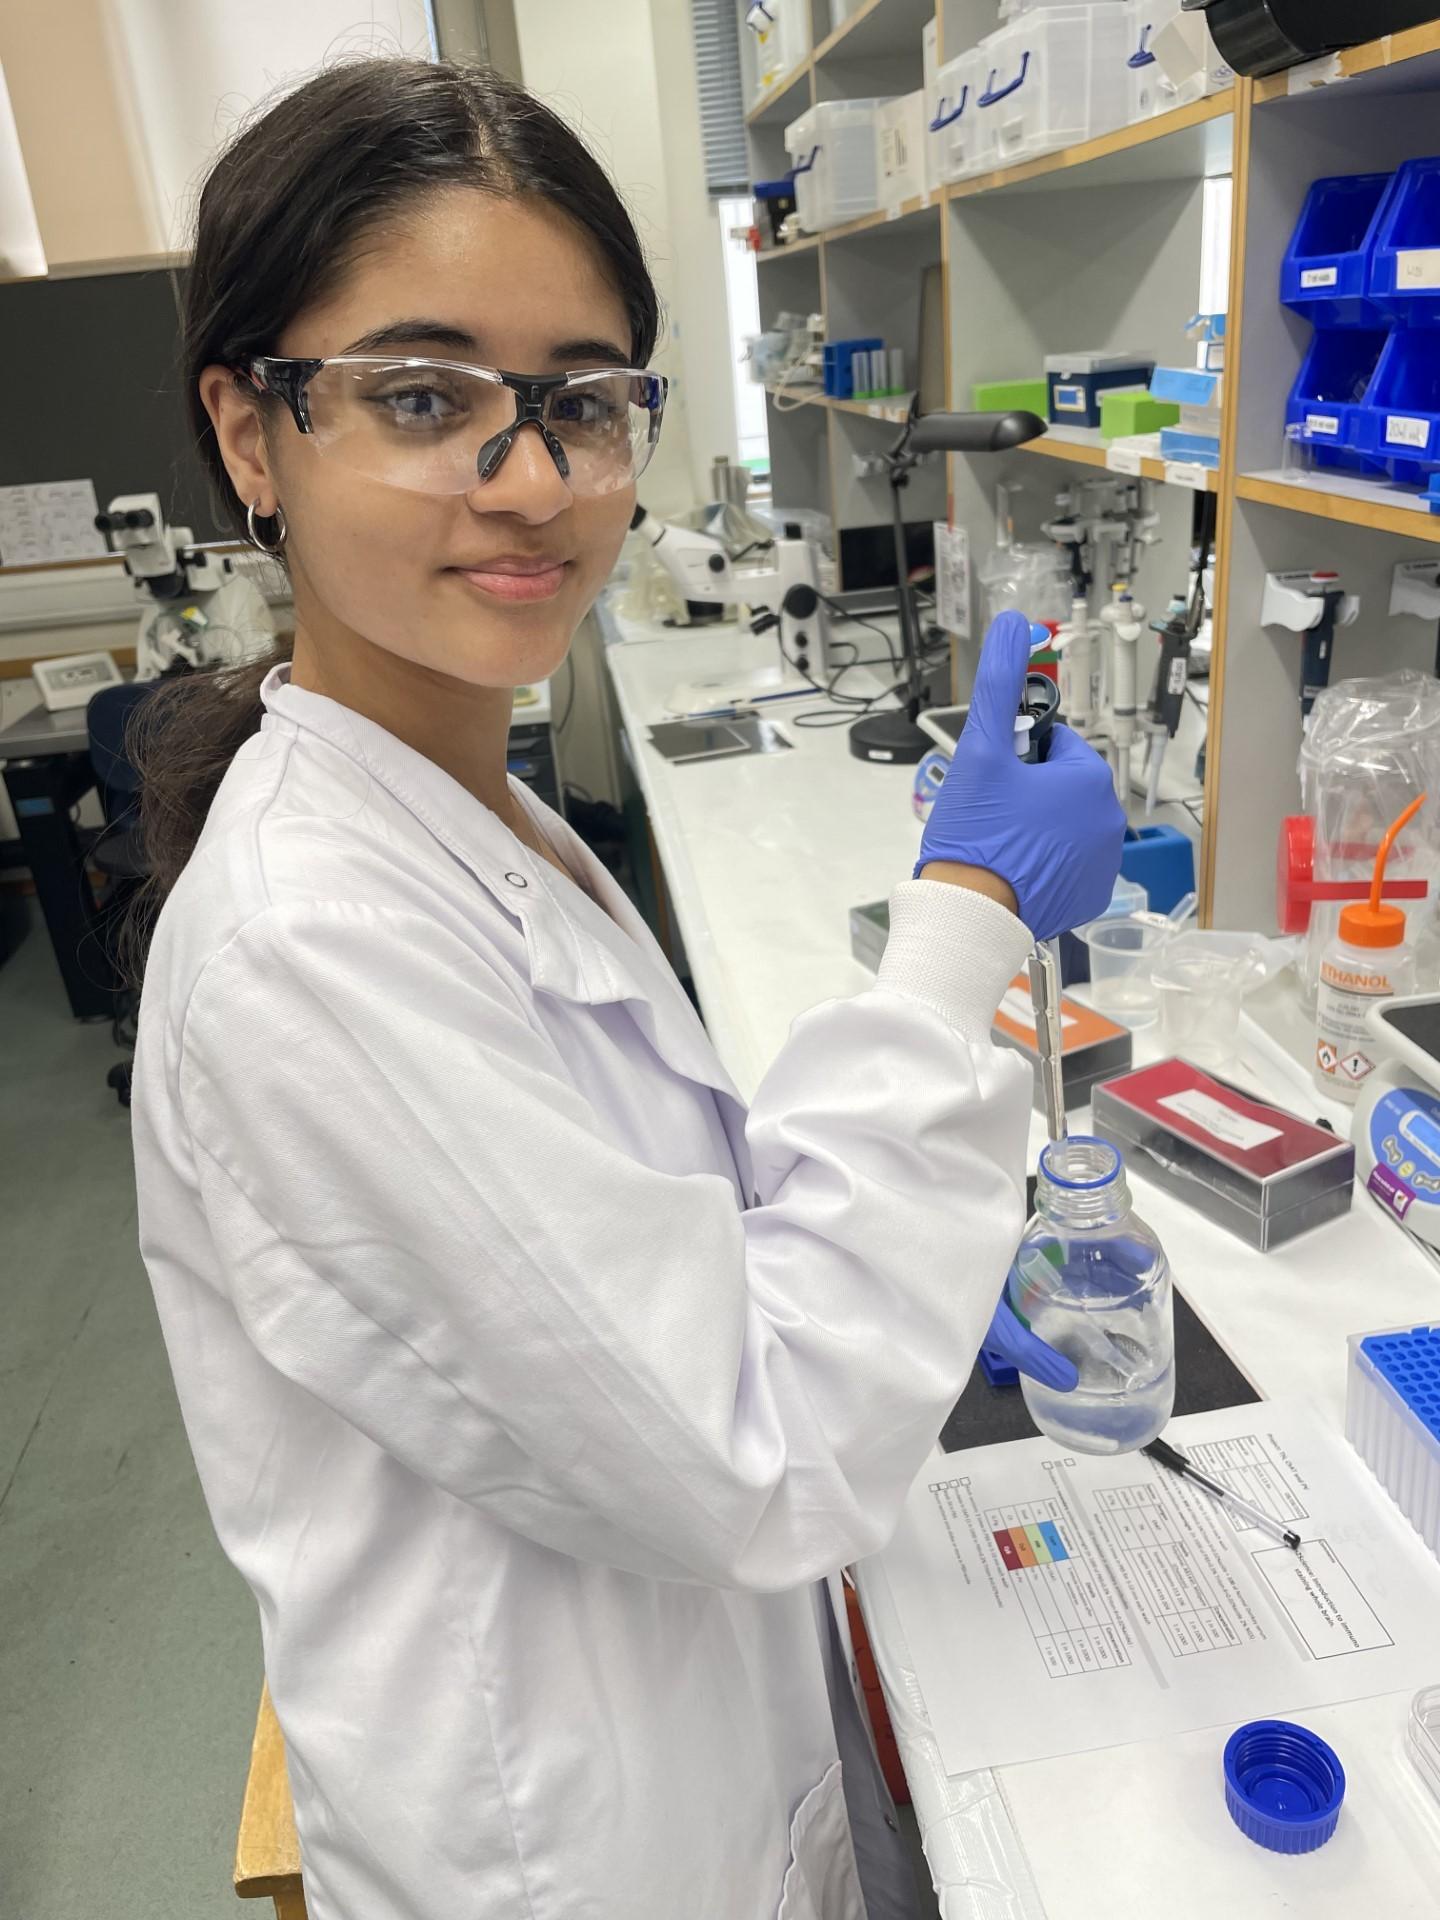 Photo of a visiting In2scienceUK school pupil working at a lab bench.